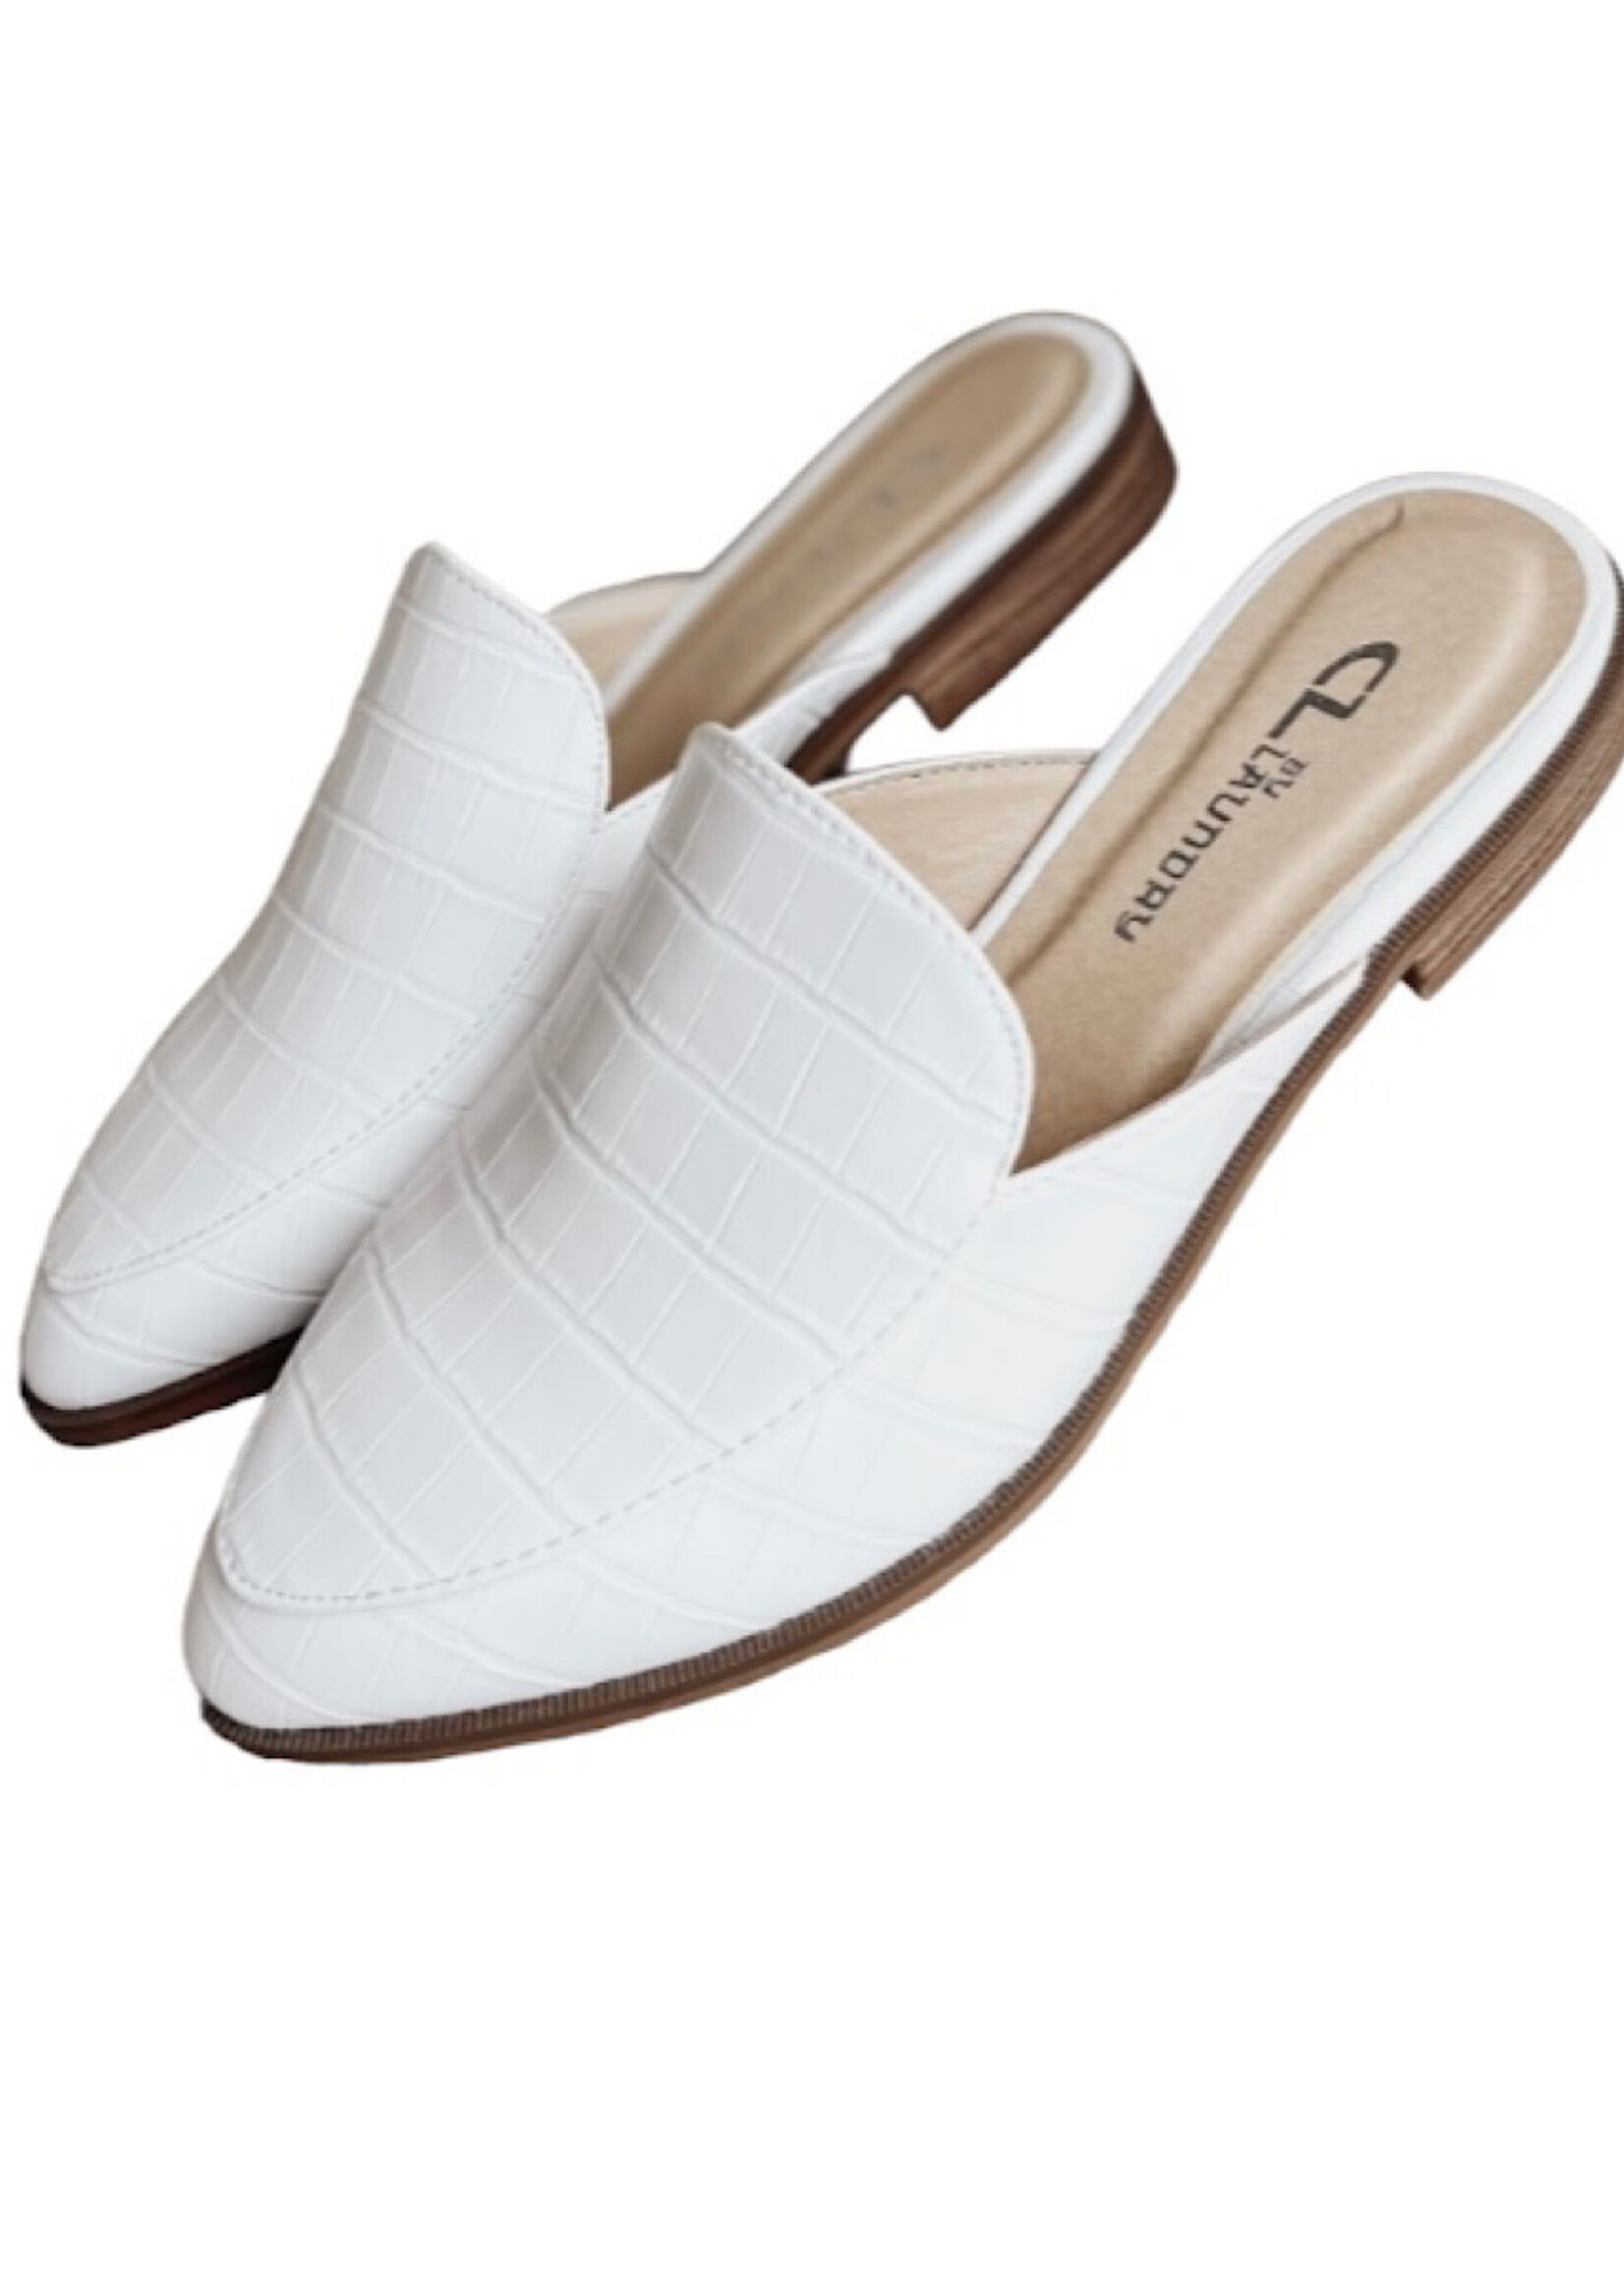 Chinese Laundry CL Freshest Croco Mule